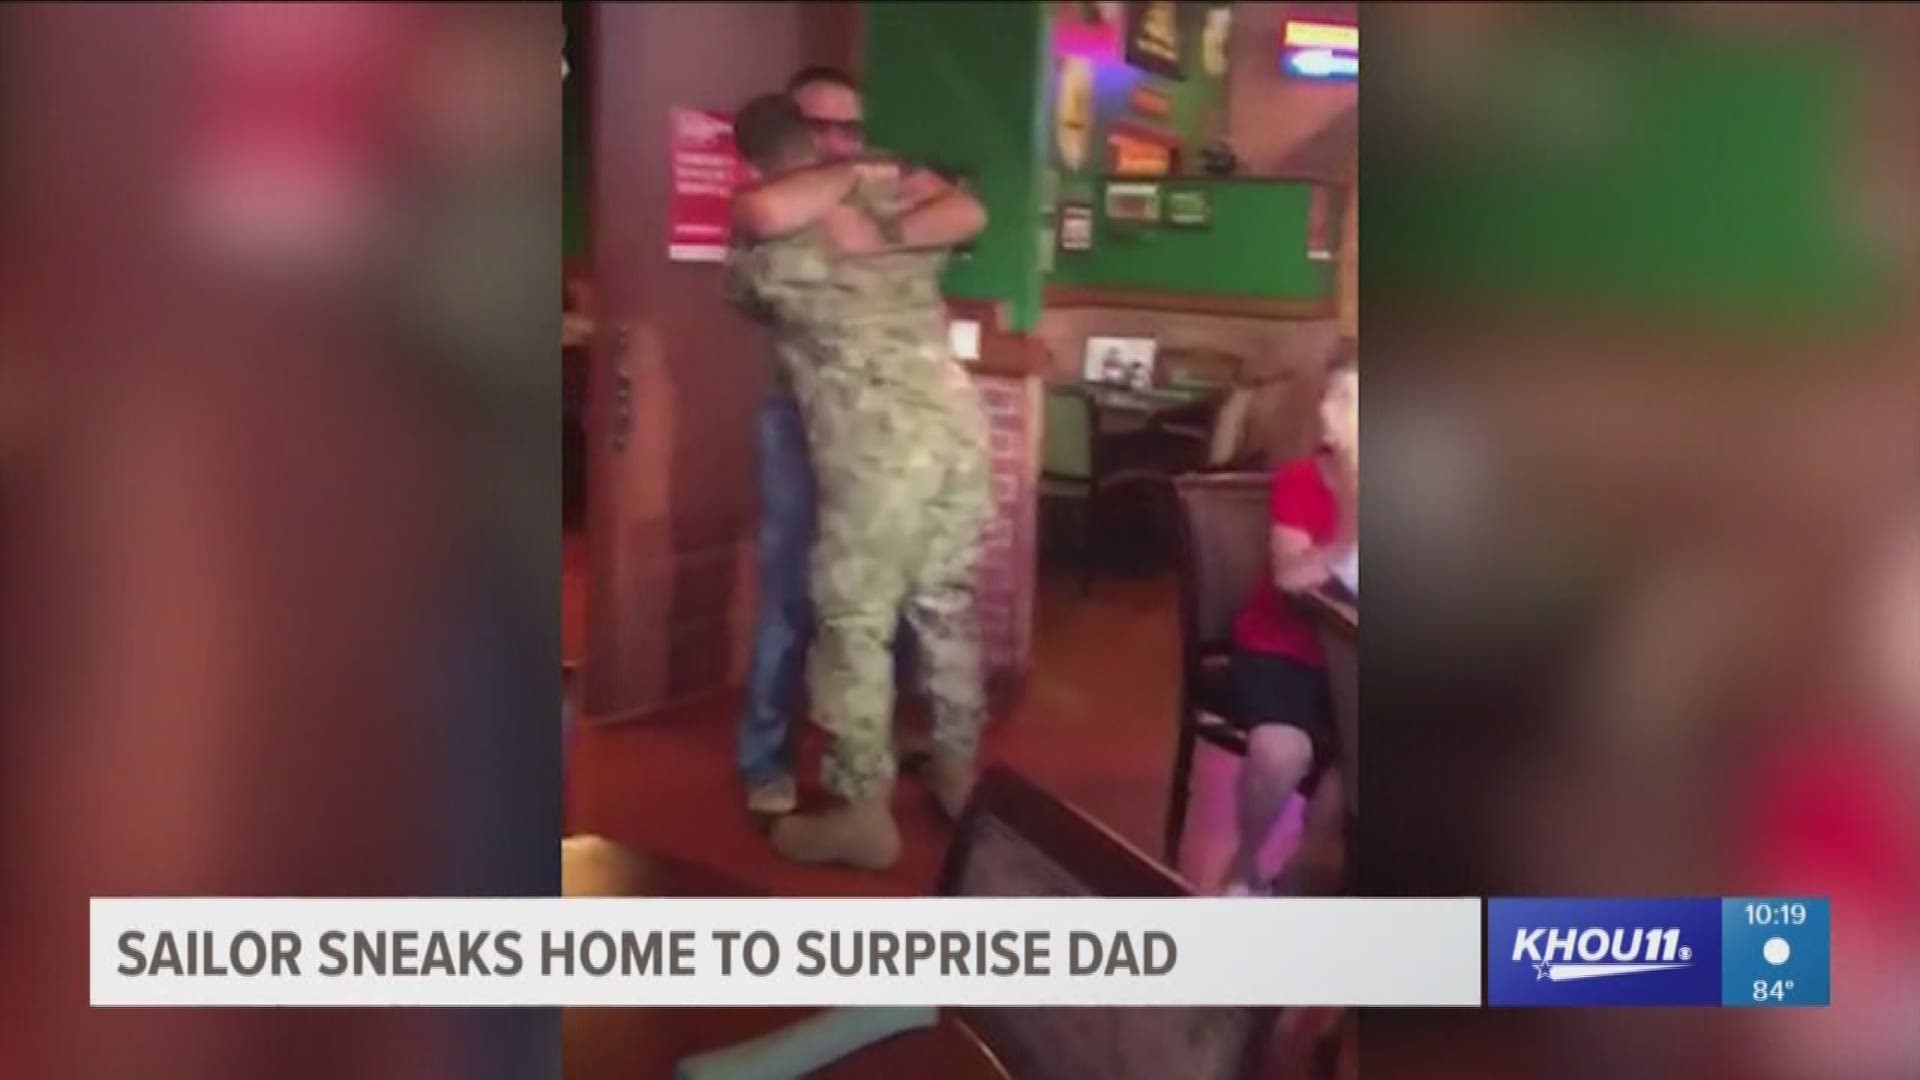 A sailor who just arrived home surprised his father at a restaurant in Richmond.